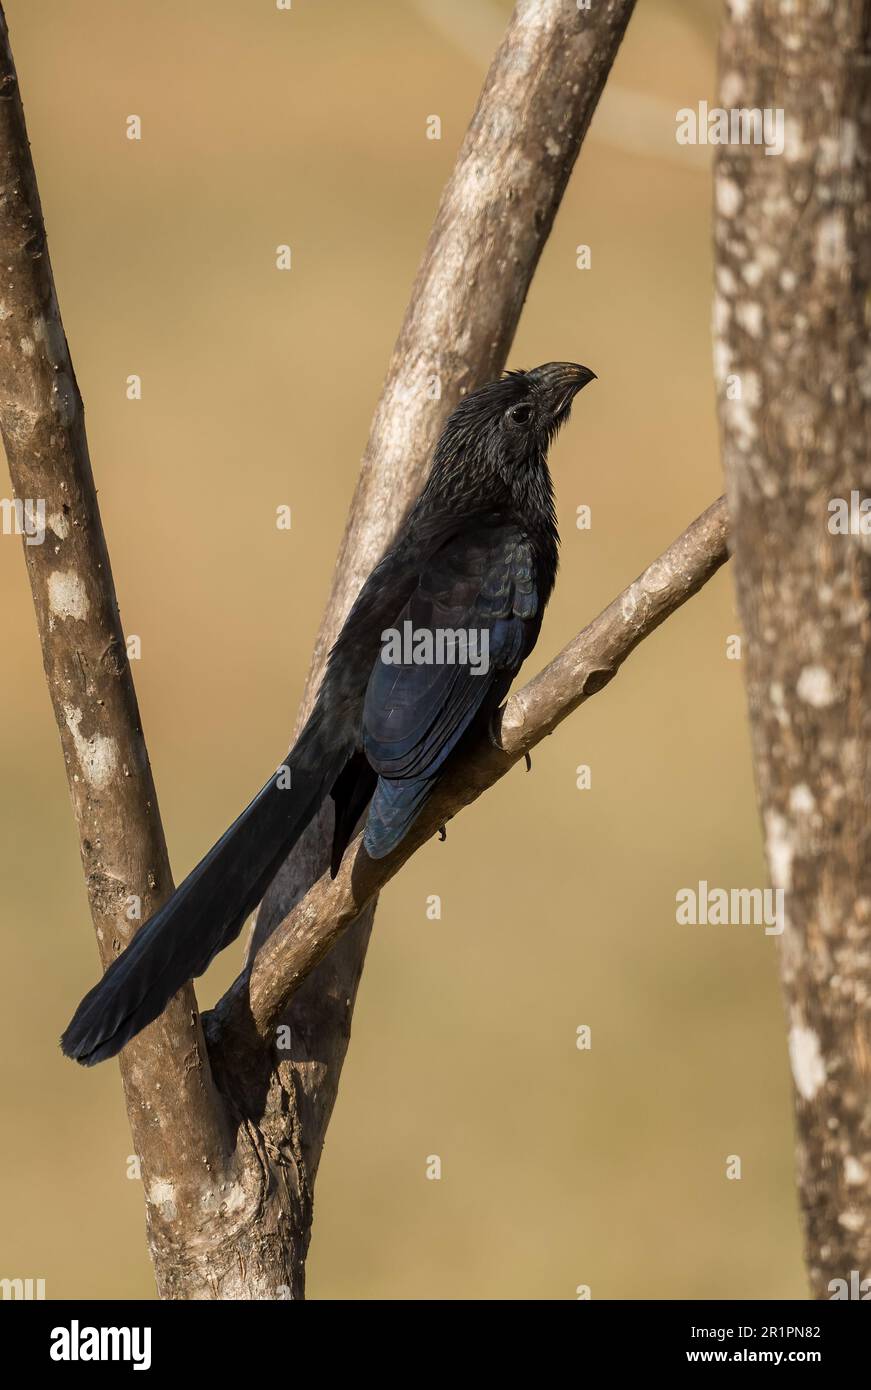 Groove-billed Ani - Crotophaga sulcirostris, special black cuckoo from Central and Latin America forests and woodlands, Cambutal, Panama. Stock Photo